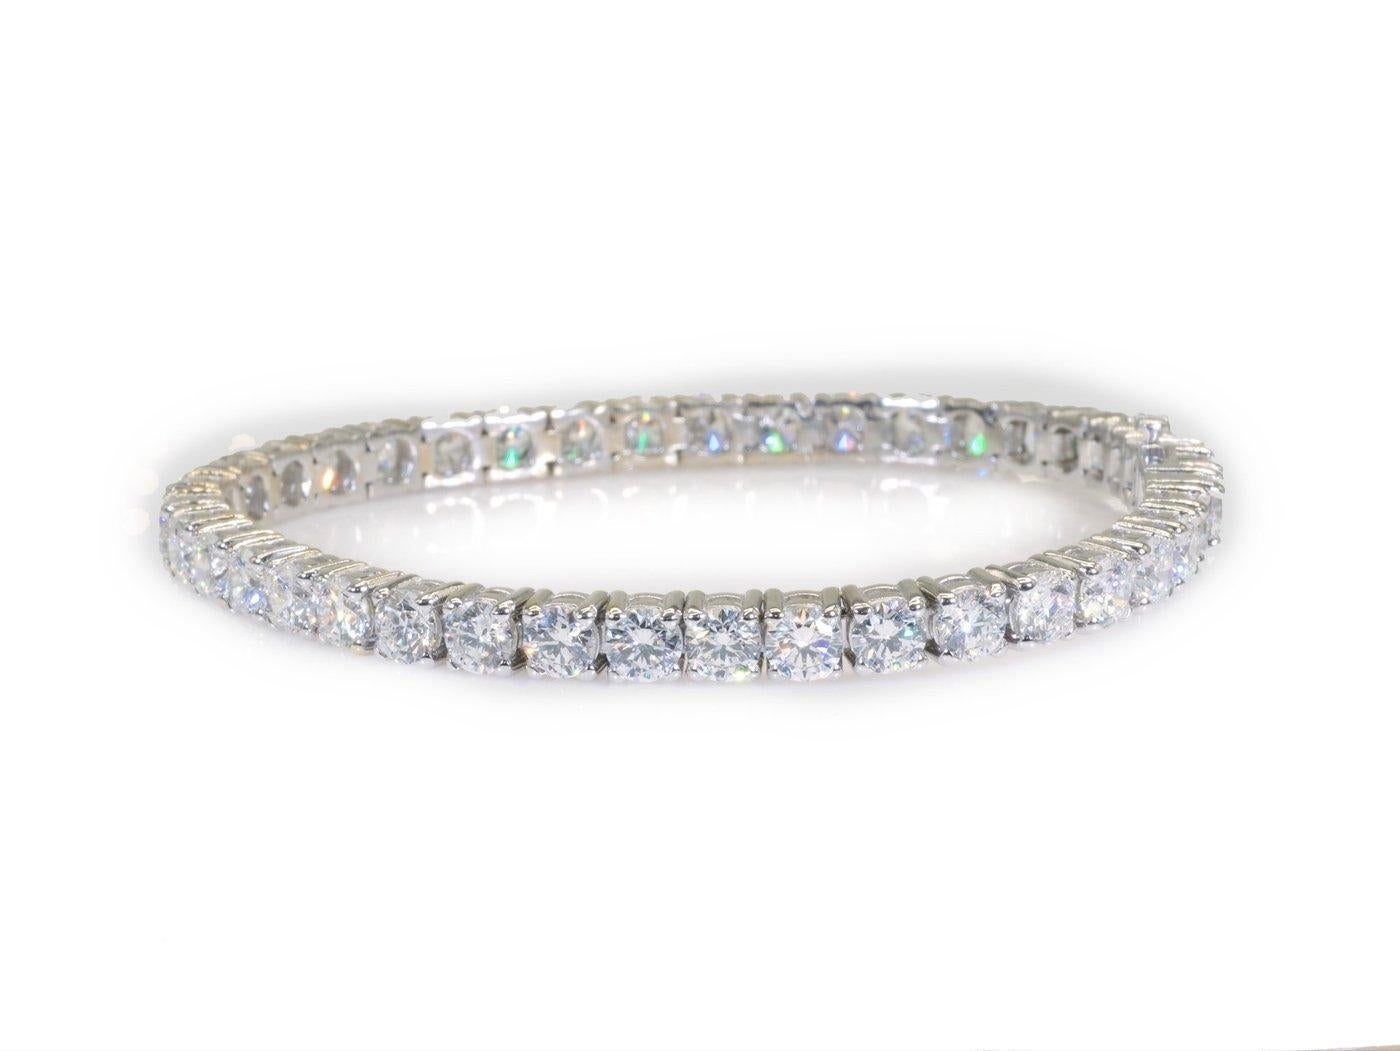 Luxurious 18k White Gold Bracelet w/ 12.51 Ct Natural Diamonds, GIA Certificate For Sale 1